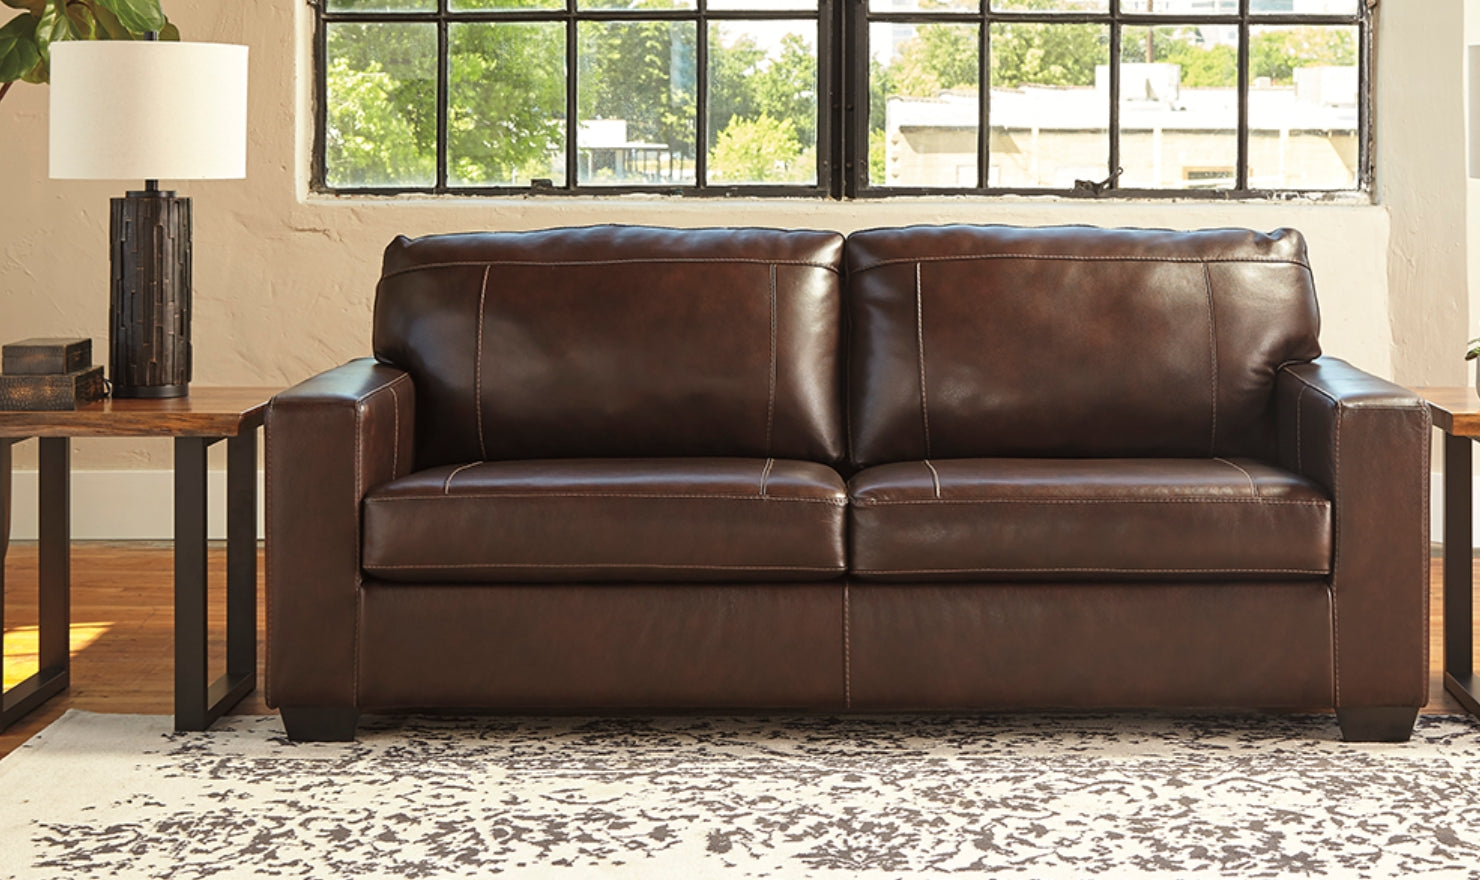 Mayan Queen Gray and Chocolate Leather Sleeper Sofa